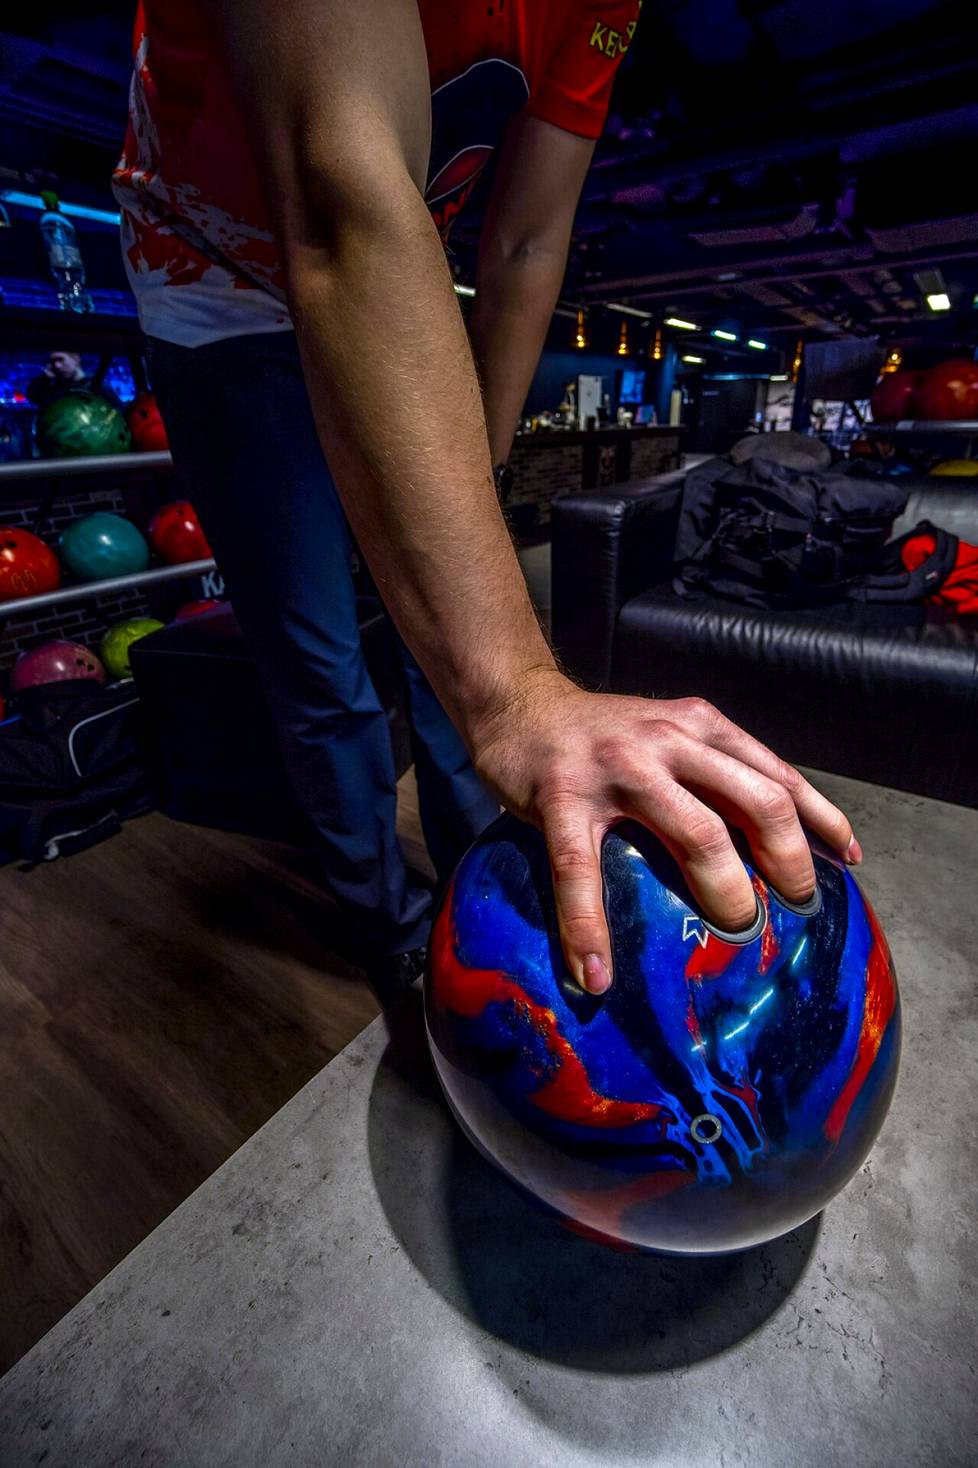 There are only two holes in a bowling ball.  There are three holes in a traditional ball.